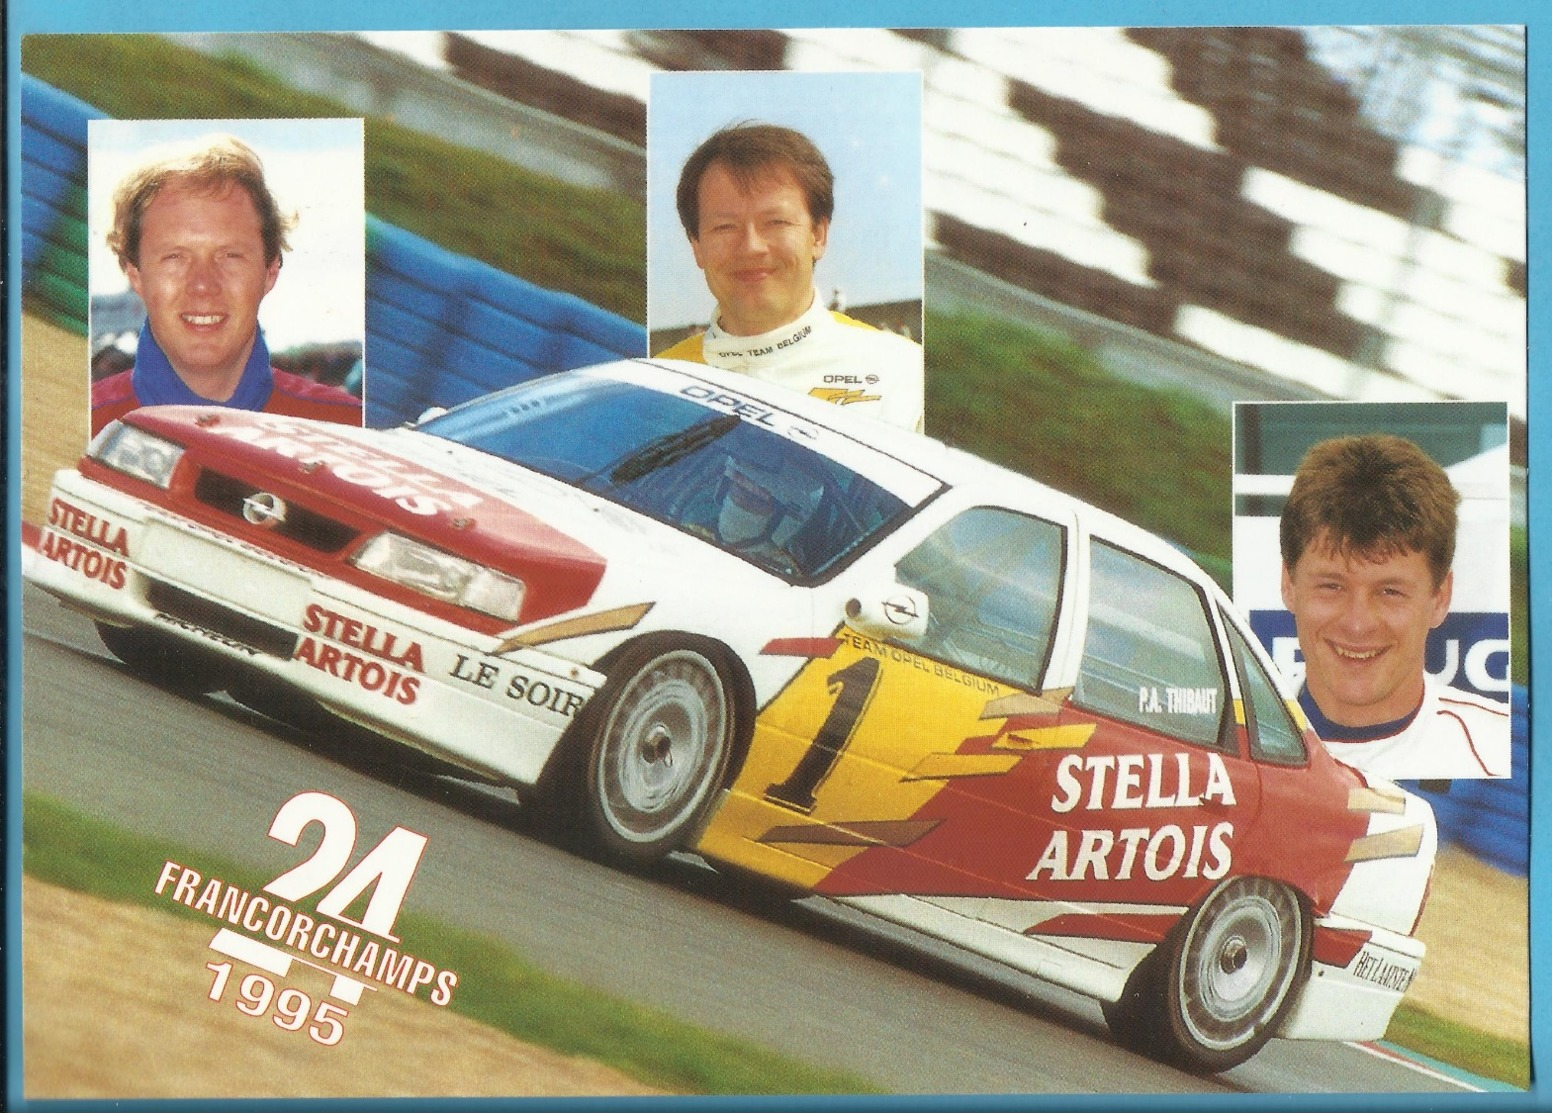 SPA FRANCORCHAMPS (Circuit National) - 24 Hr Francorchamps 1995 - Team OPEL BELGIUM - 21 X 15.5 Cm - Stavelot